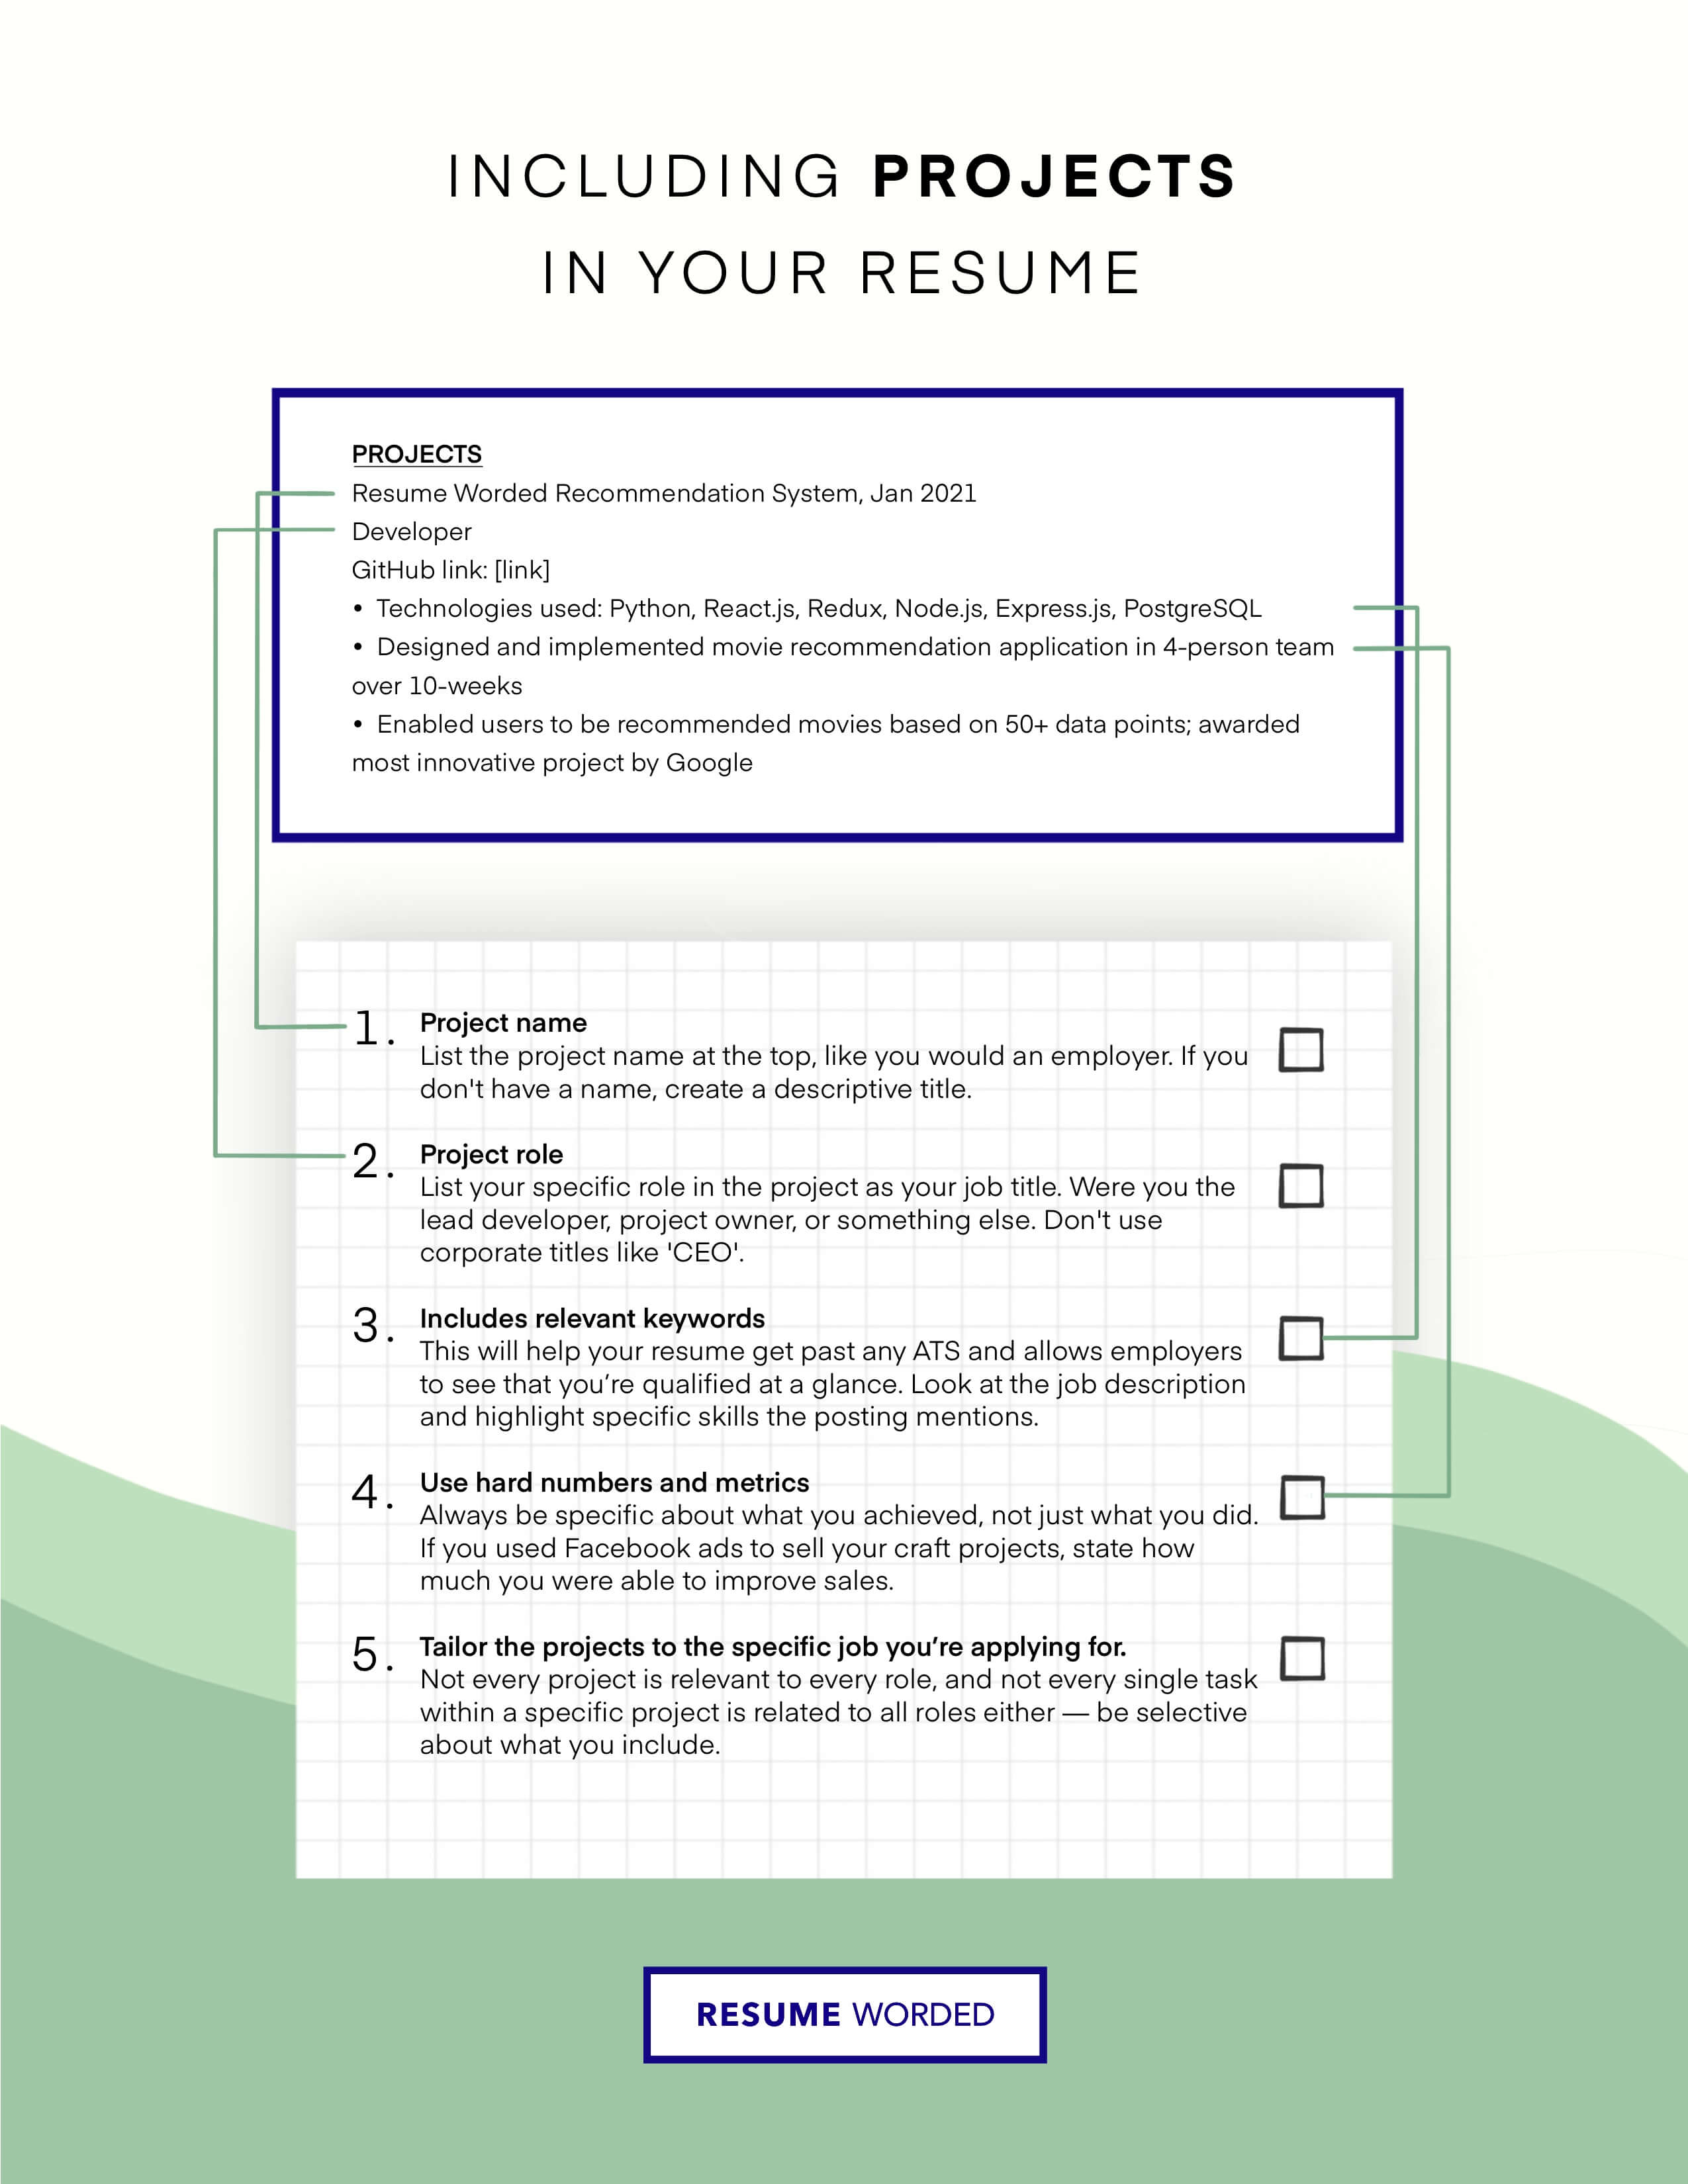 how to list college projects on resume